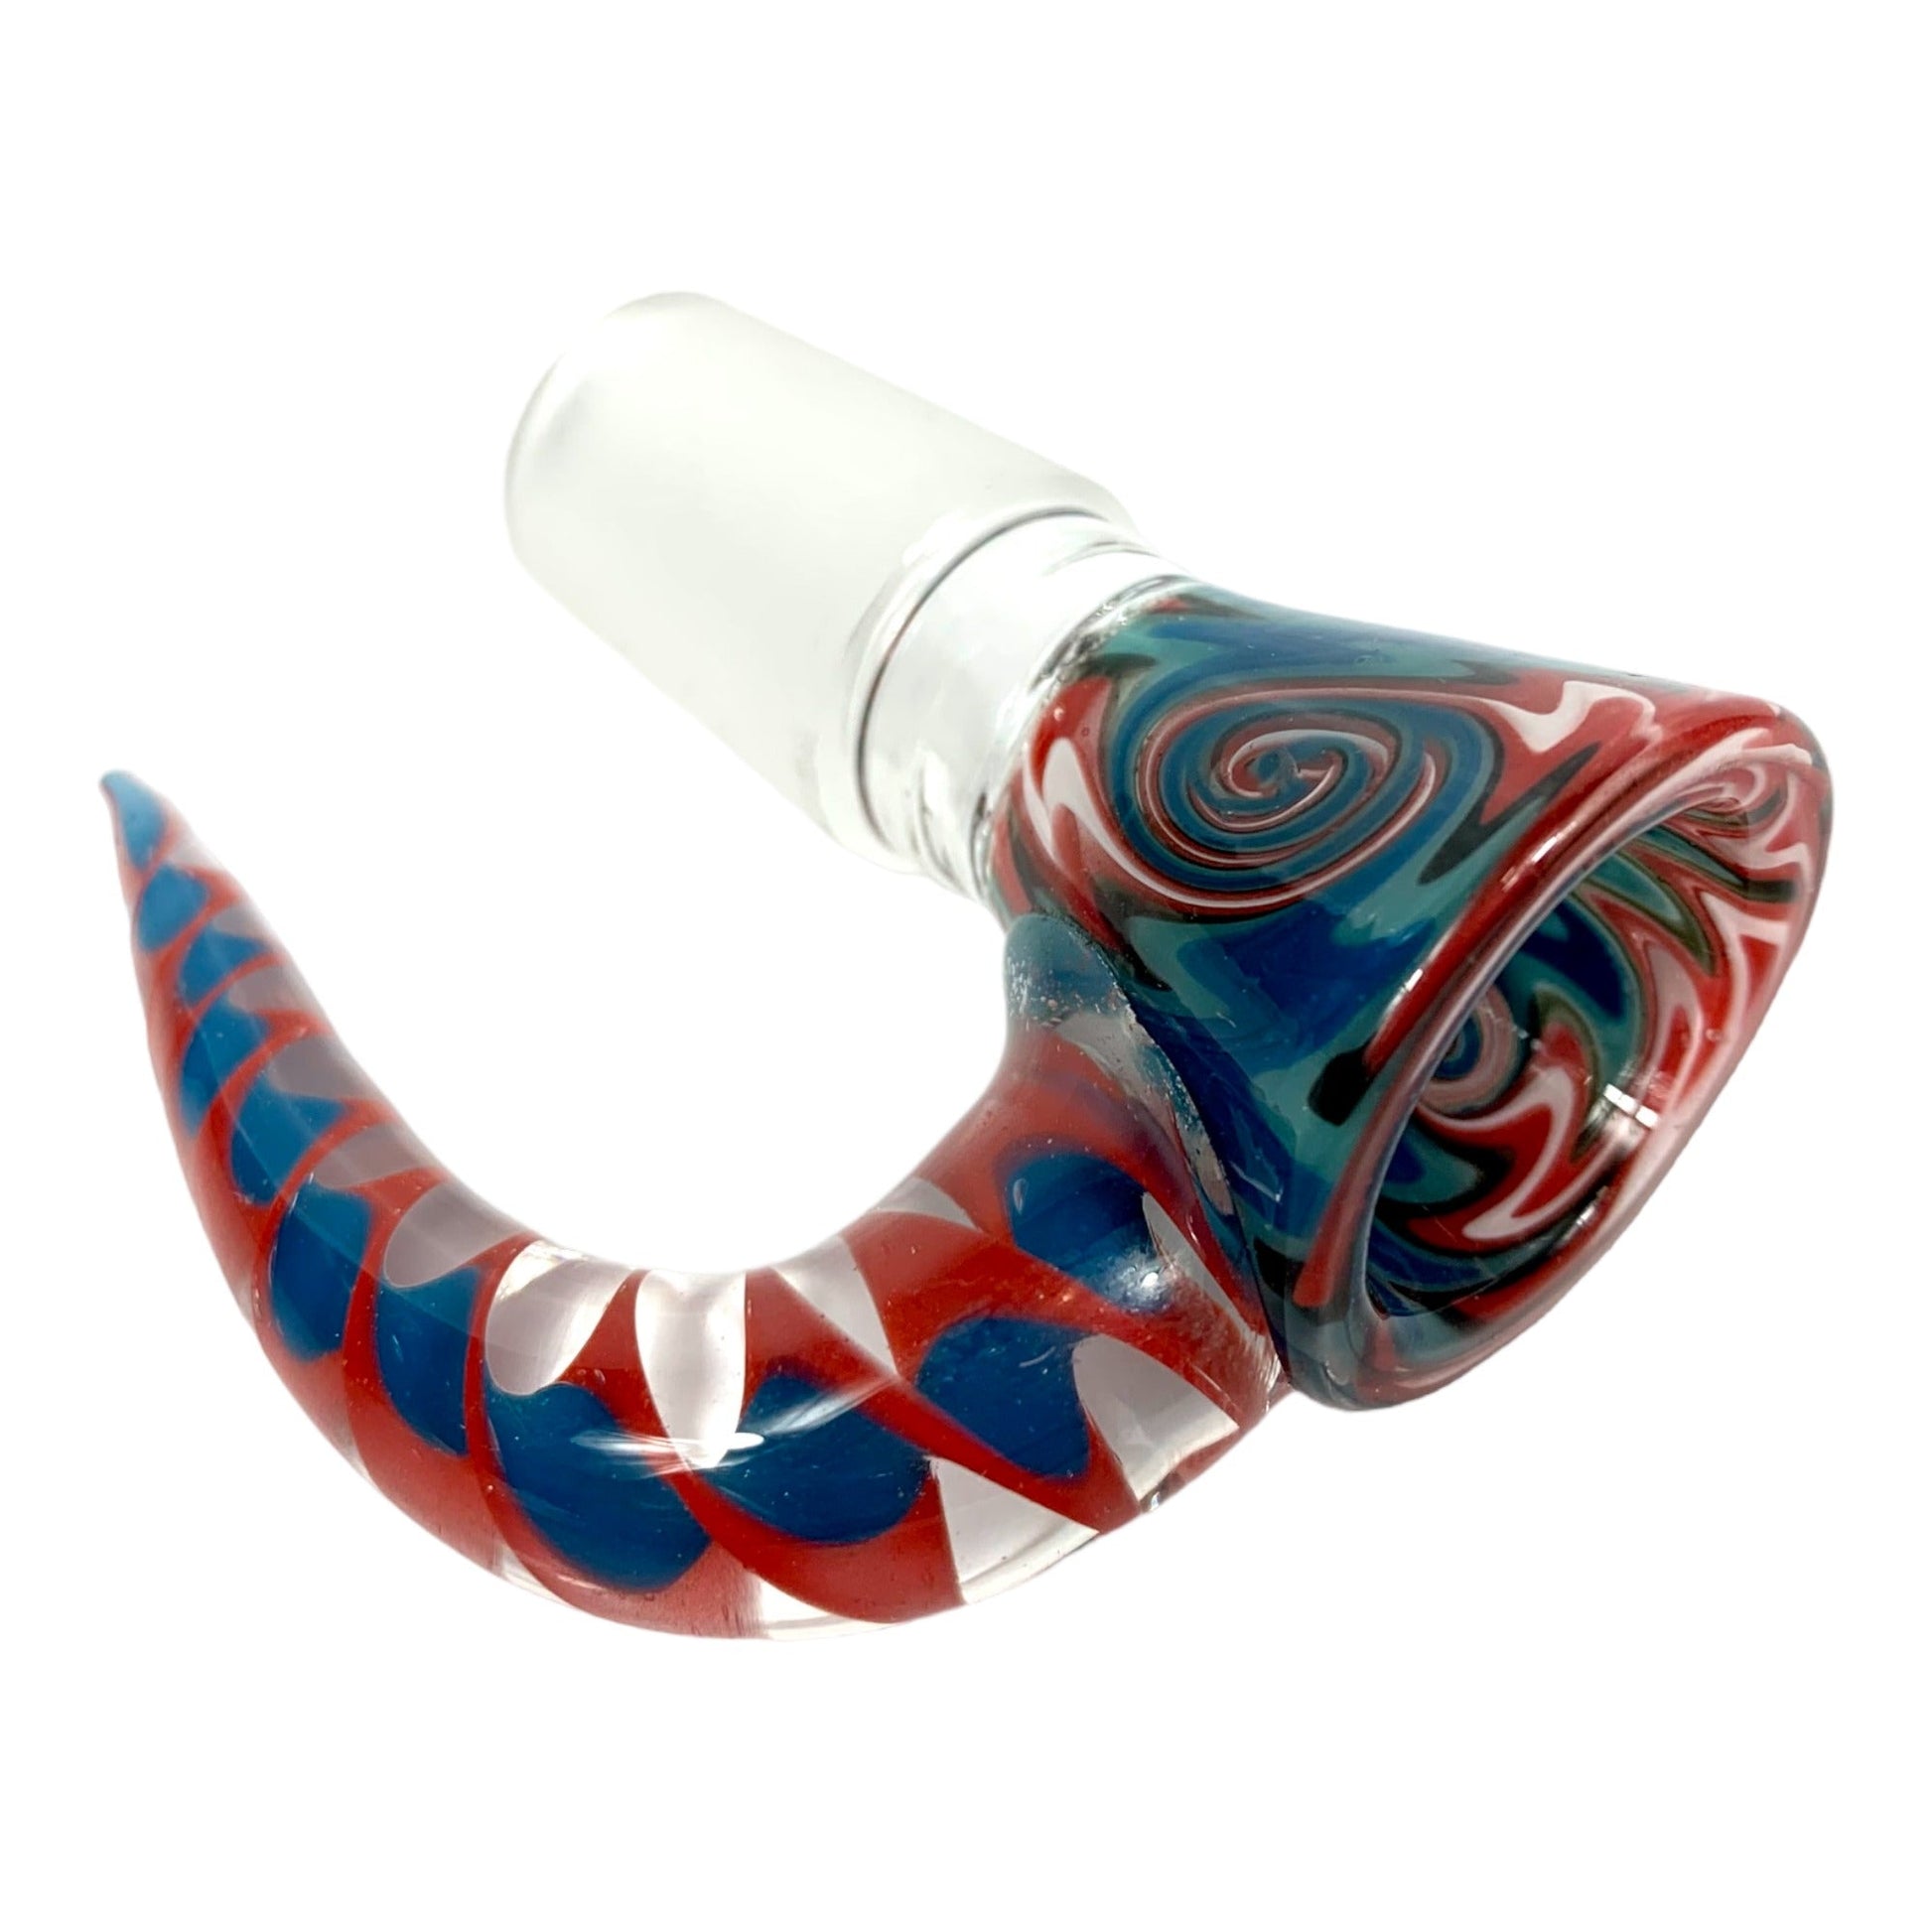 18mm Wig Wam Cone Piece - 4 Hole Glass Filter - Red and Blue - The Bong Baron